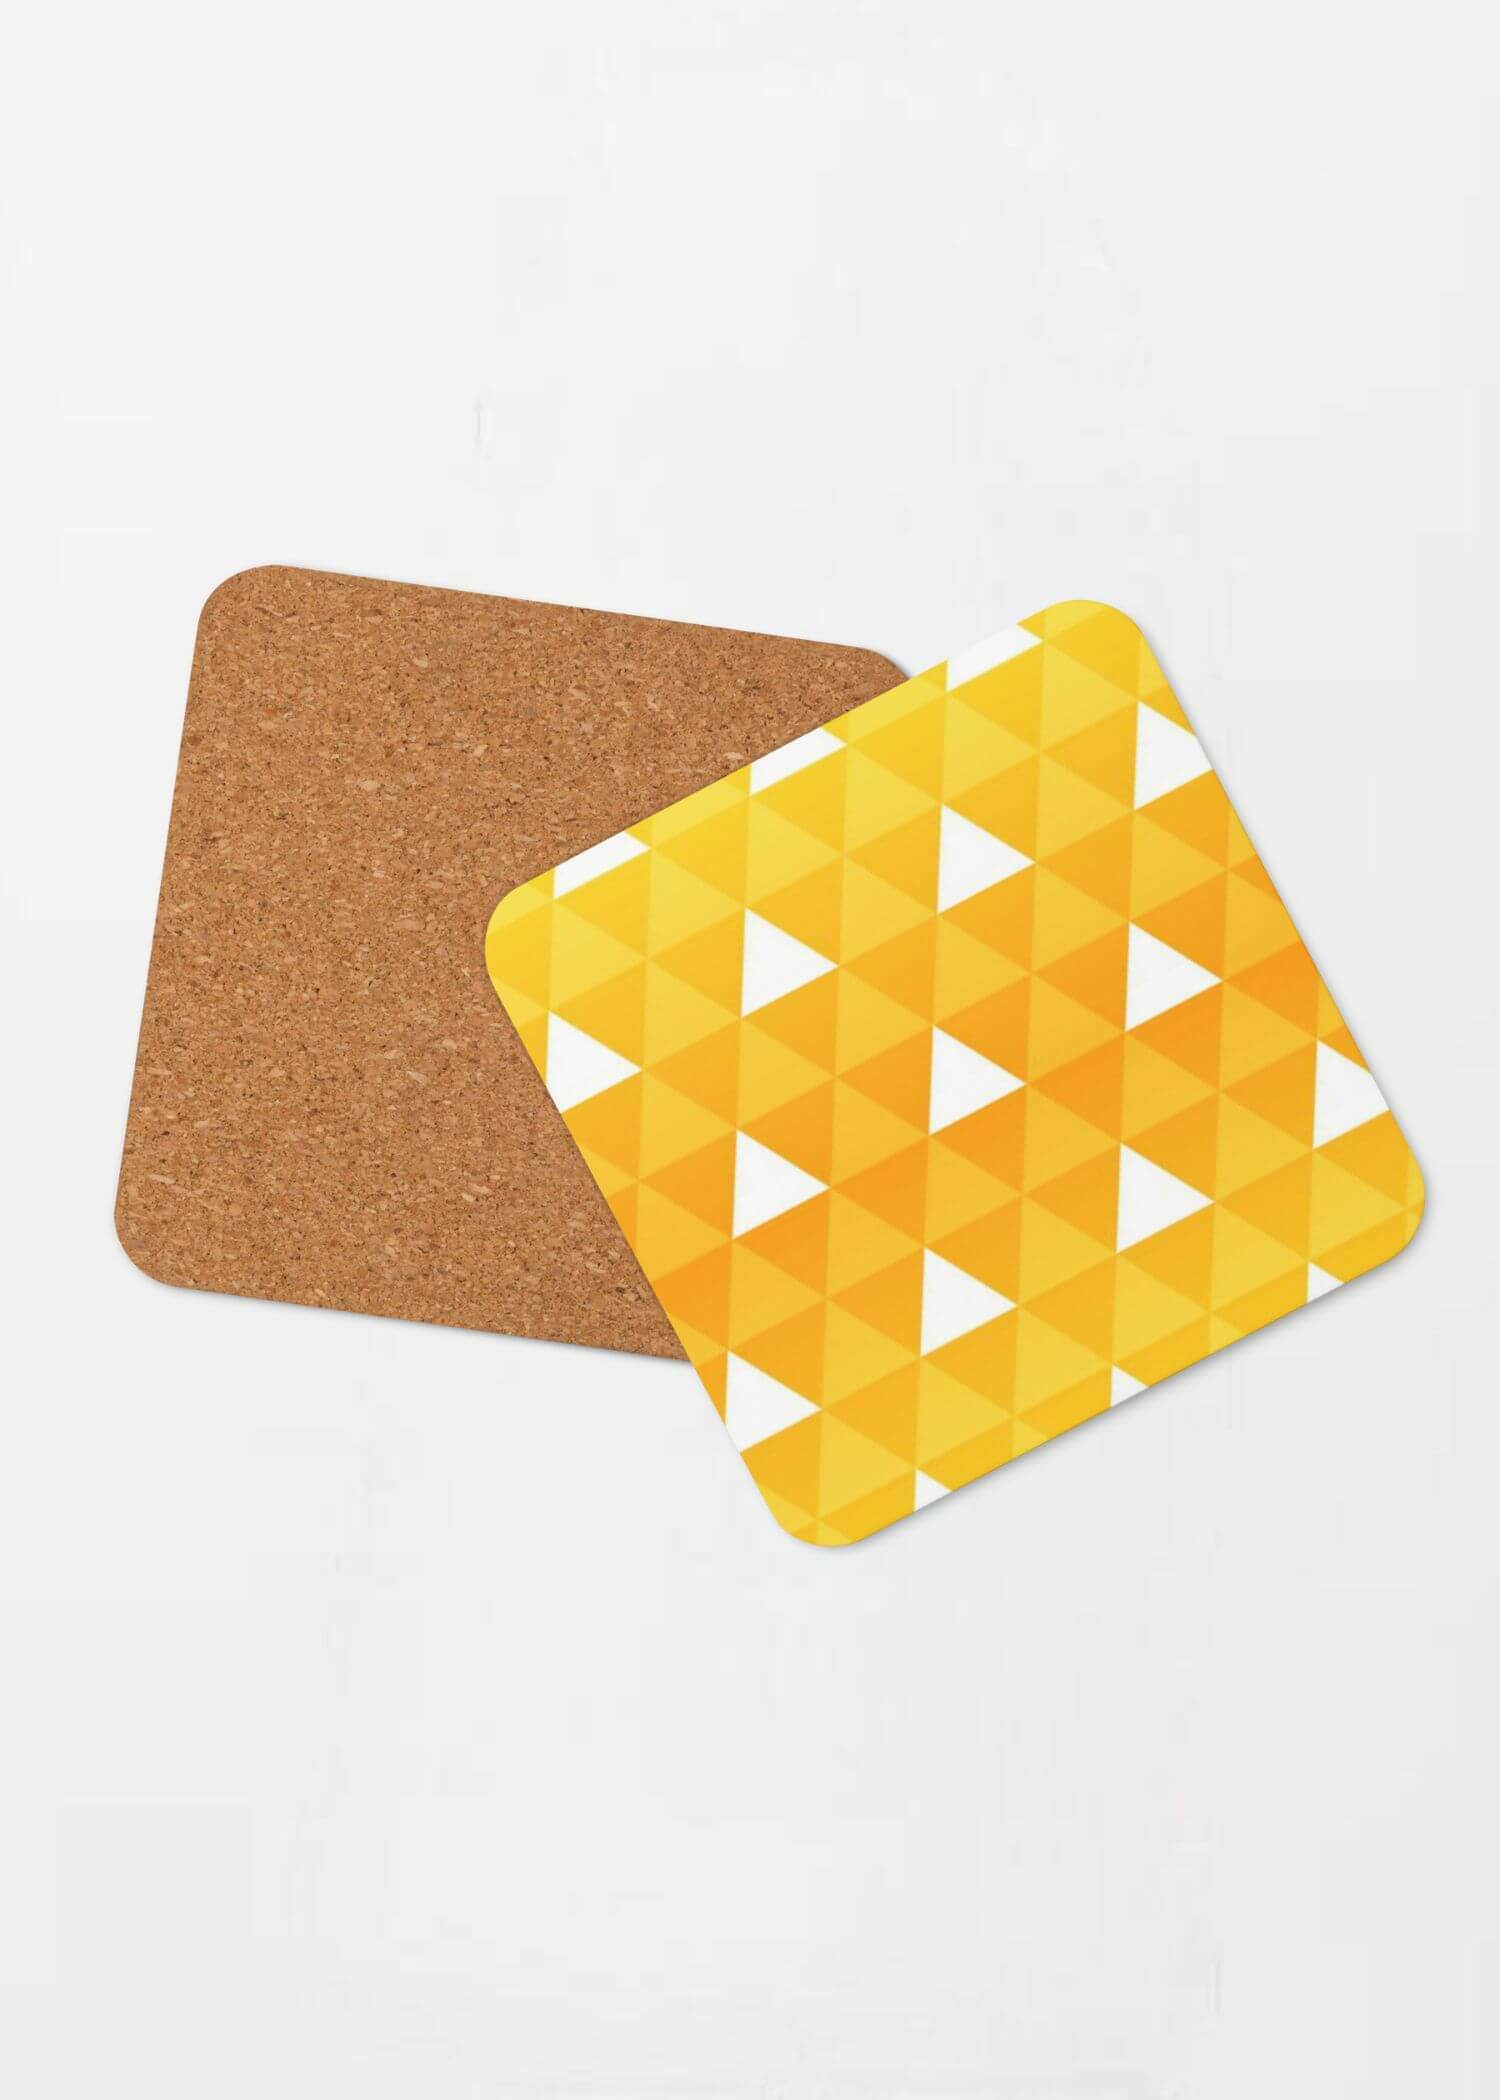 Cork-Back miteigi Uroko Coaster Traditional Japanese scales pattern designed by miteigi drinks coasters in bright yellow with white triangles pattern